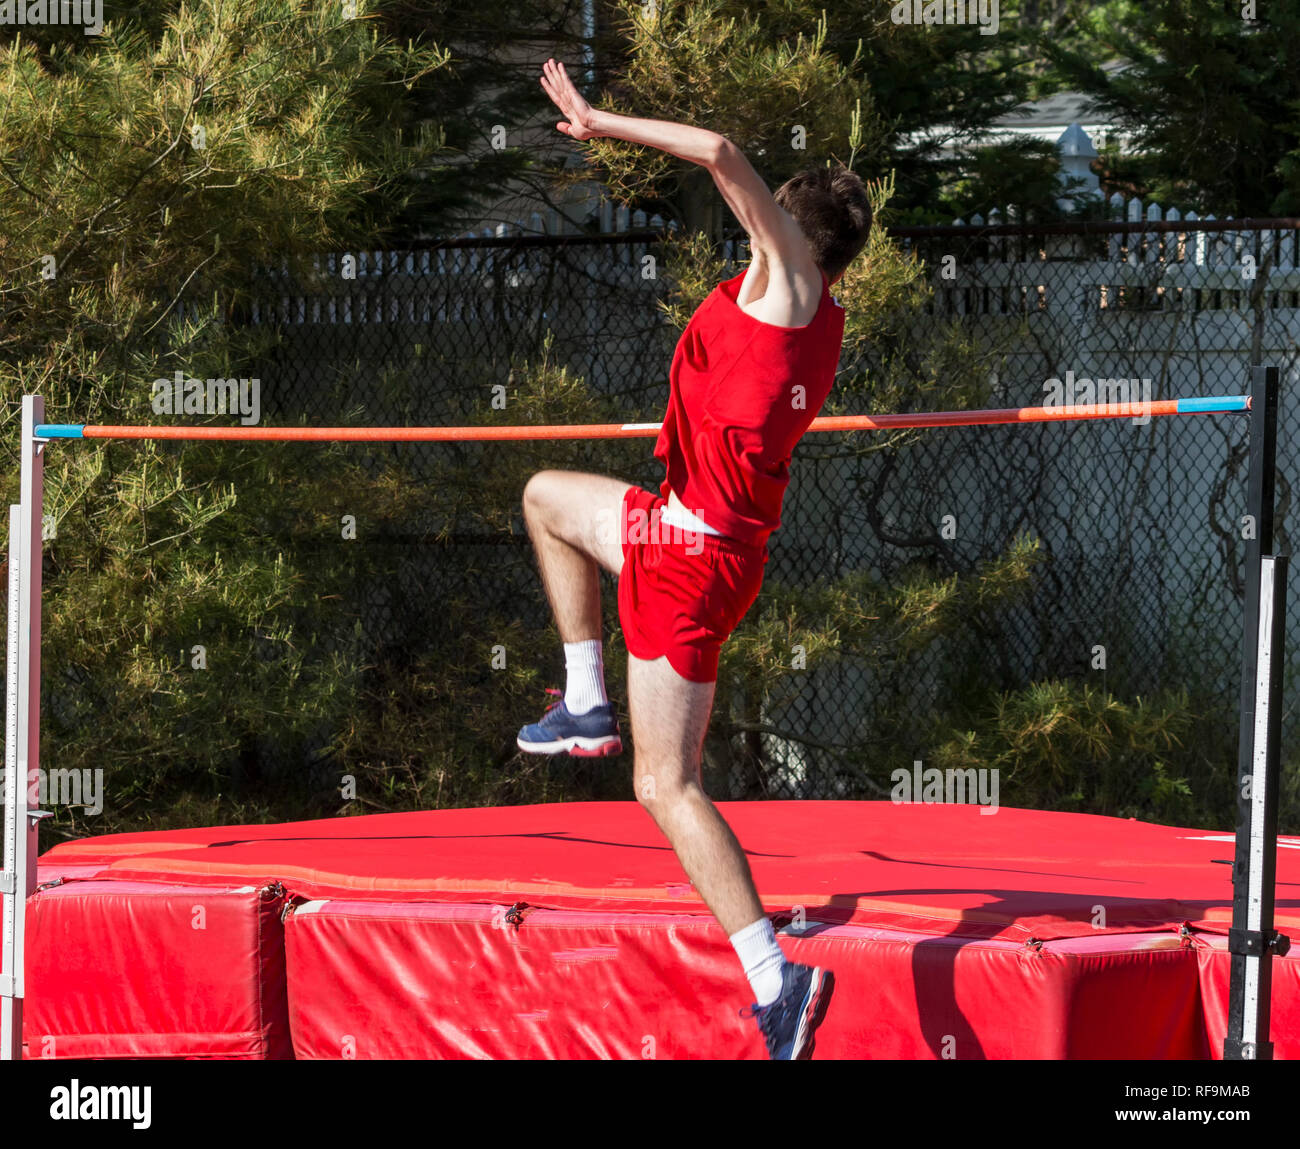 A high school track and field high jumper is taking off from the ground as he attempts to jump over the orange bar onto the red matts during a high ju Stock Photo